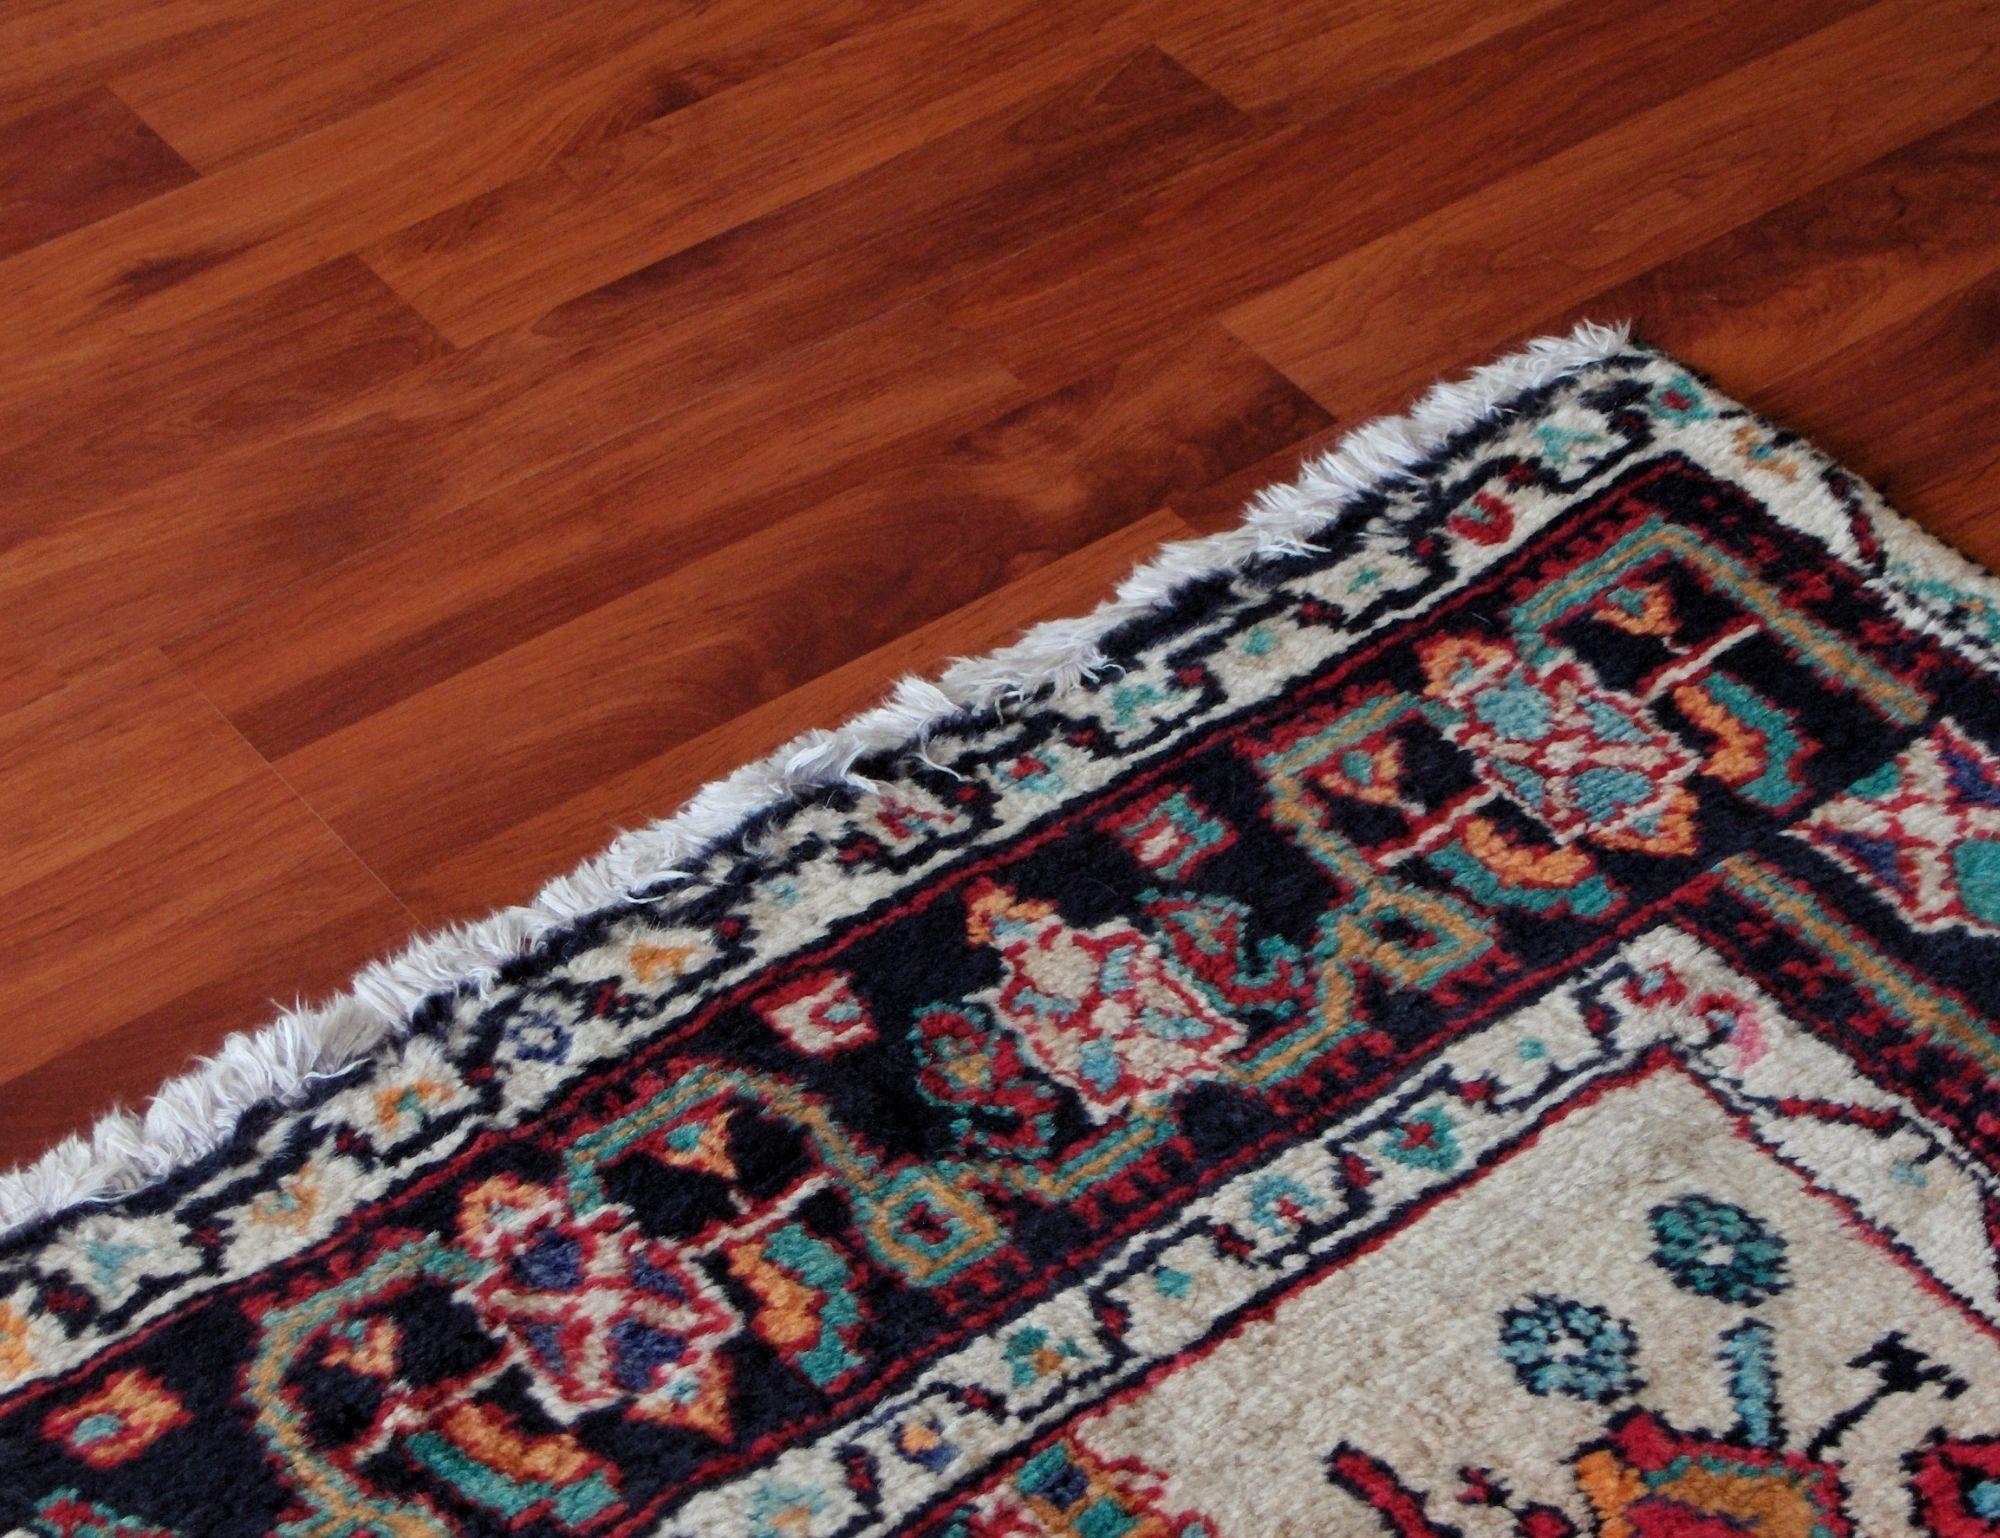 How to Make Rugs Stay Put